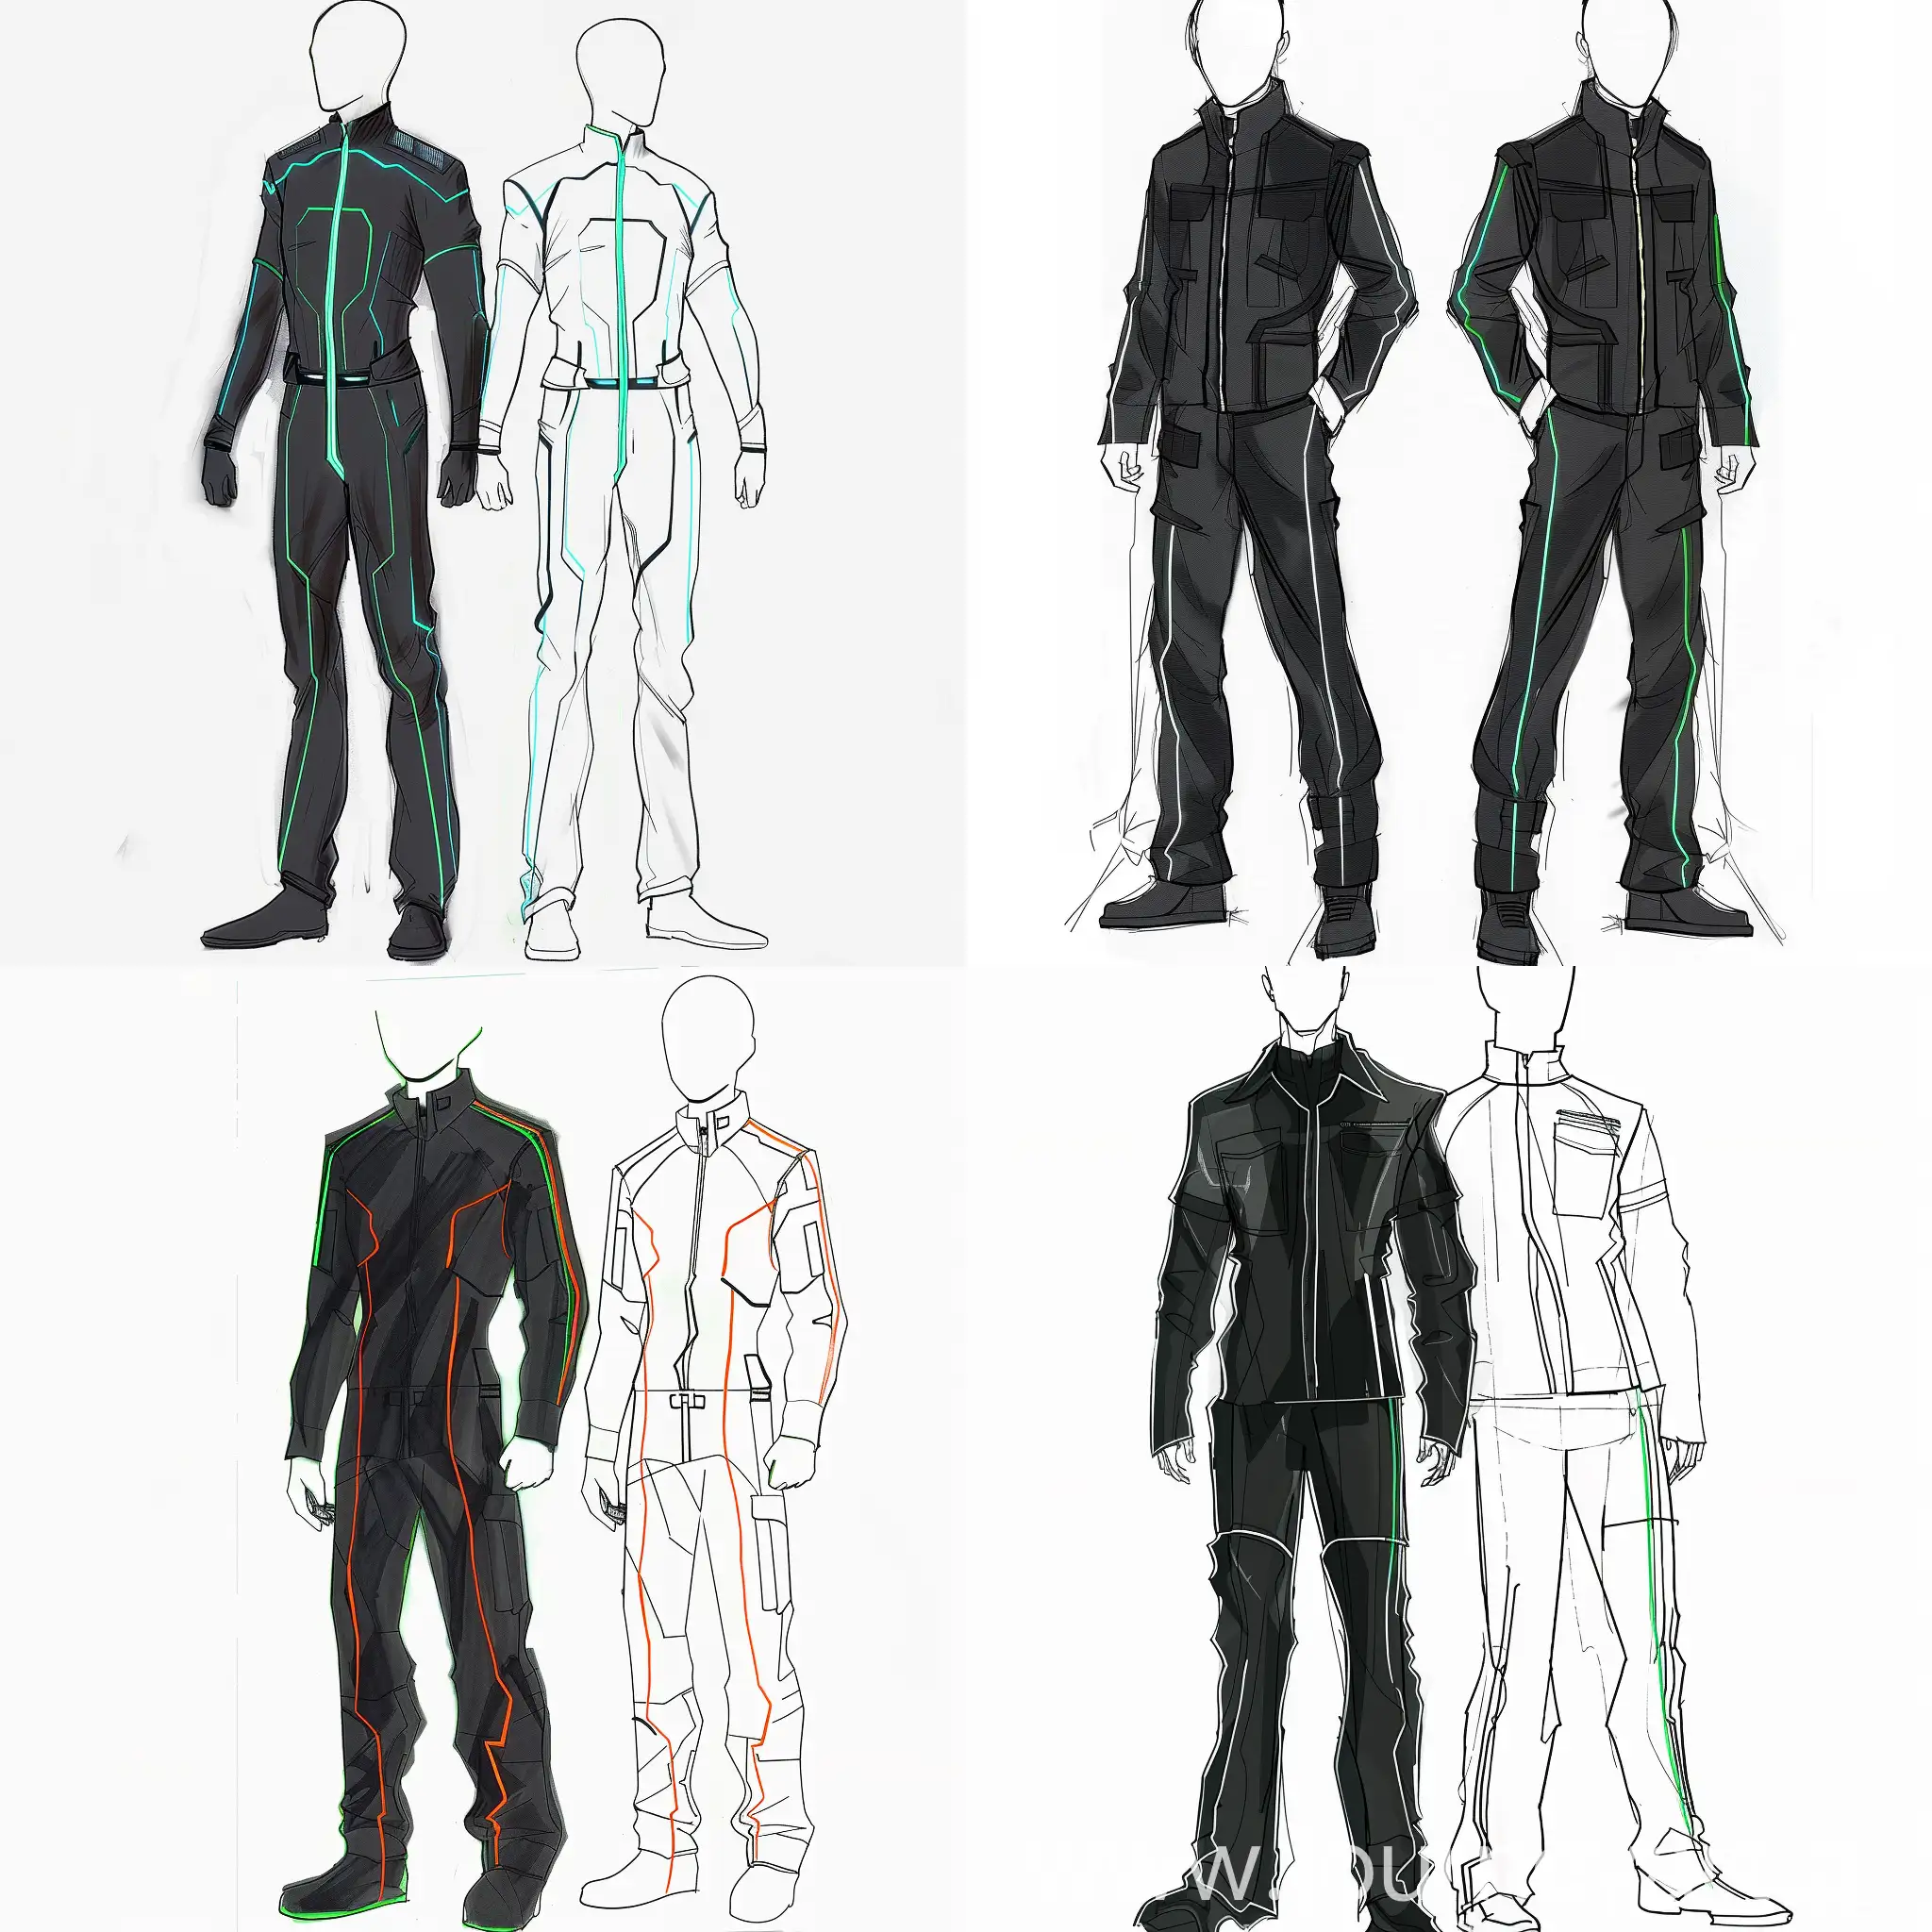 Men Fashion Sketch inspired by the film Tron: Legacy

